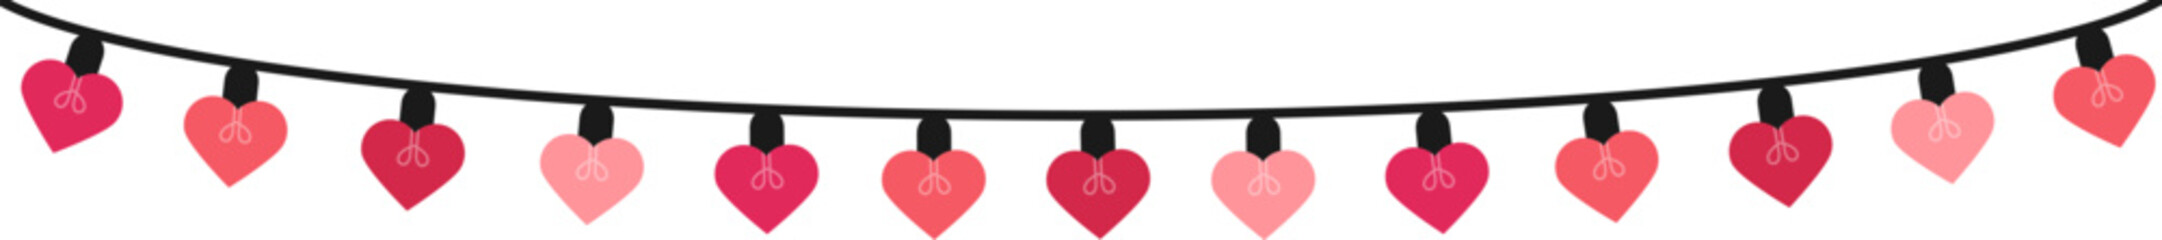 Valentines day hearts garland string. Valentines day decoration with bright lights.Heart light garland. Pink light bulbs for decoration .Pink heart shaped fairy lights. Heart garland seamless border.	